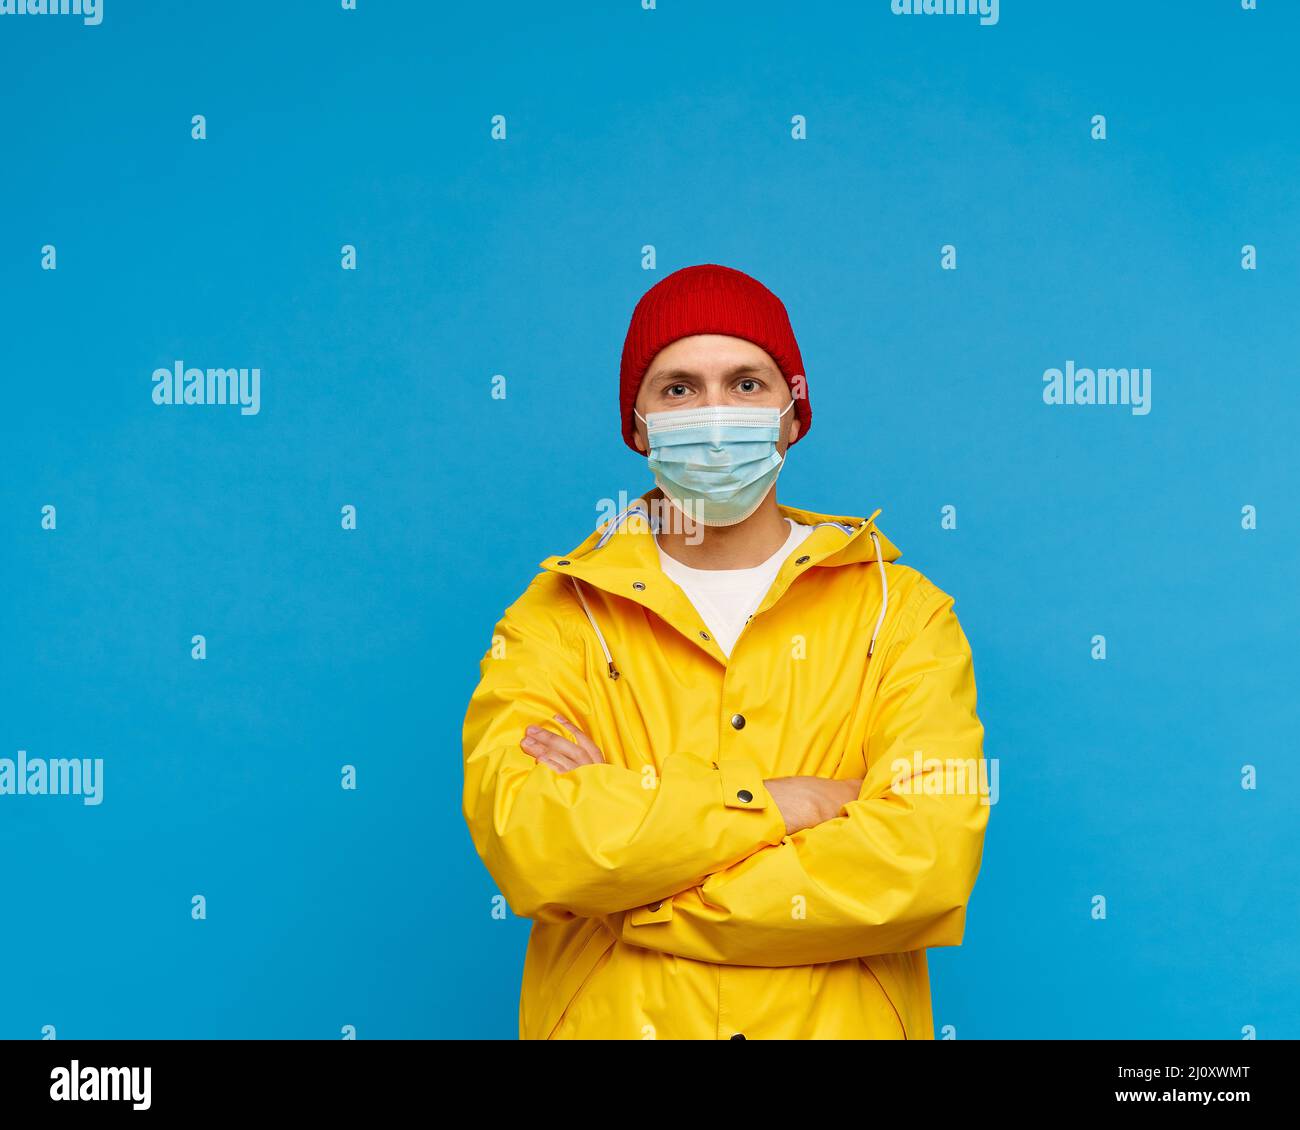 Waisted portrait of man in protective medical mask stands with arms crossed and looks at camera Stock Photo